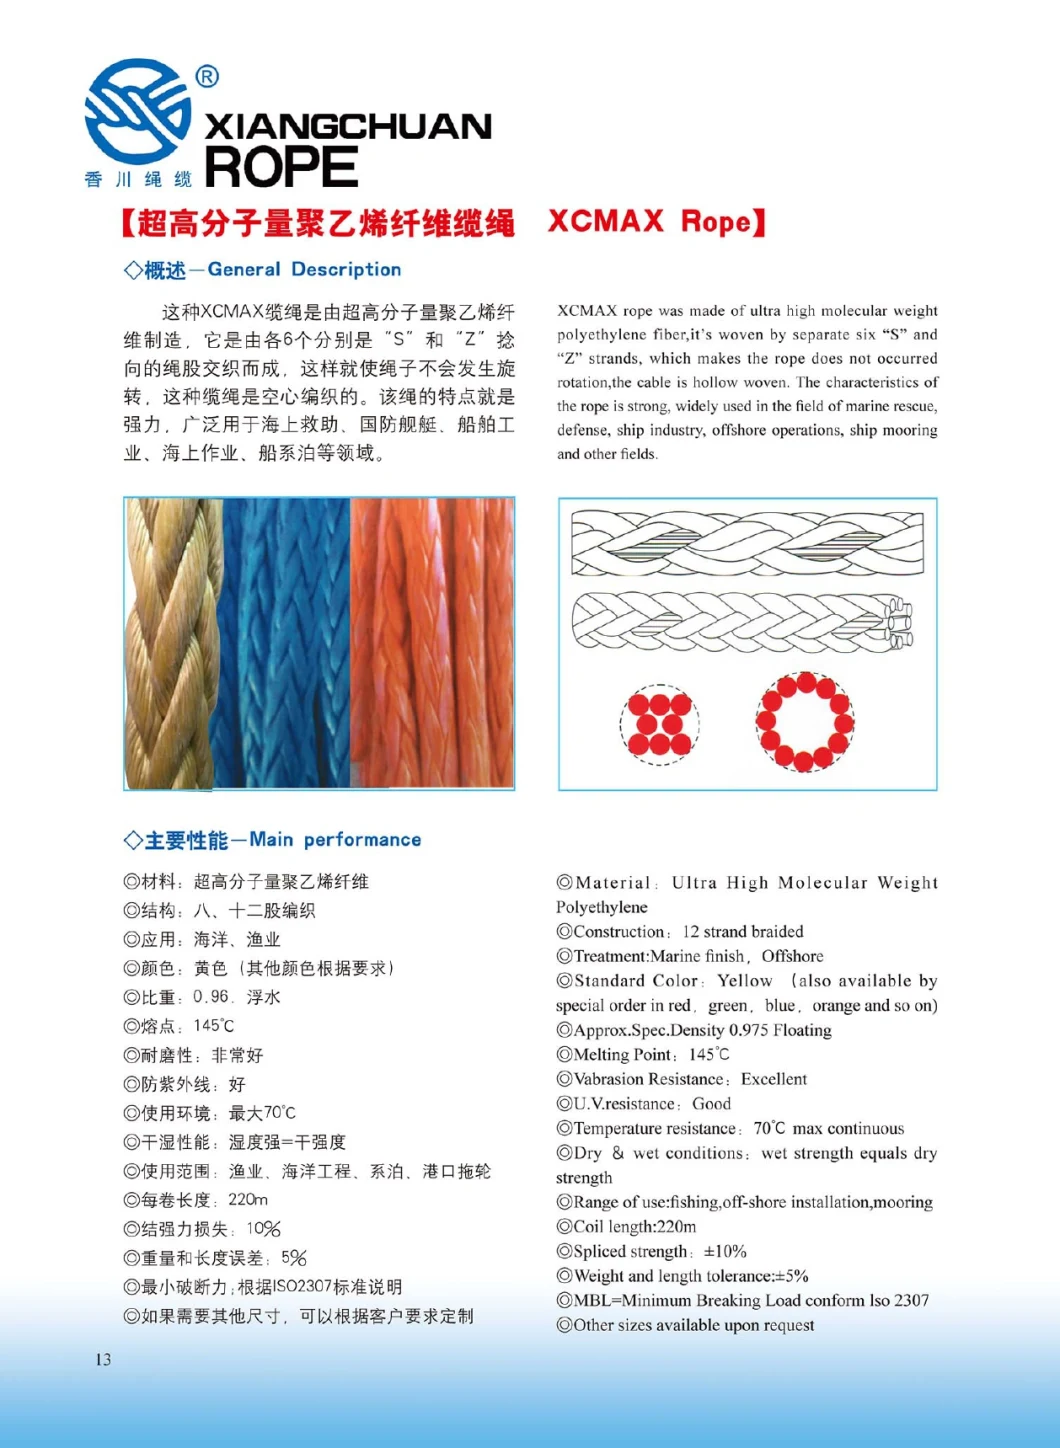 12 Strand Global Ultra High Molecular Weight Polyethylene Rope for Aviation Marine Mining and Others